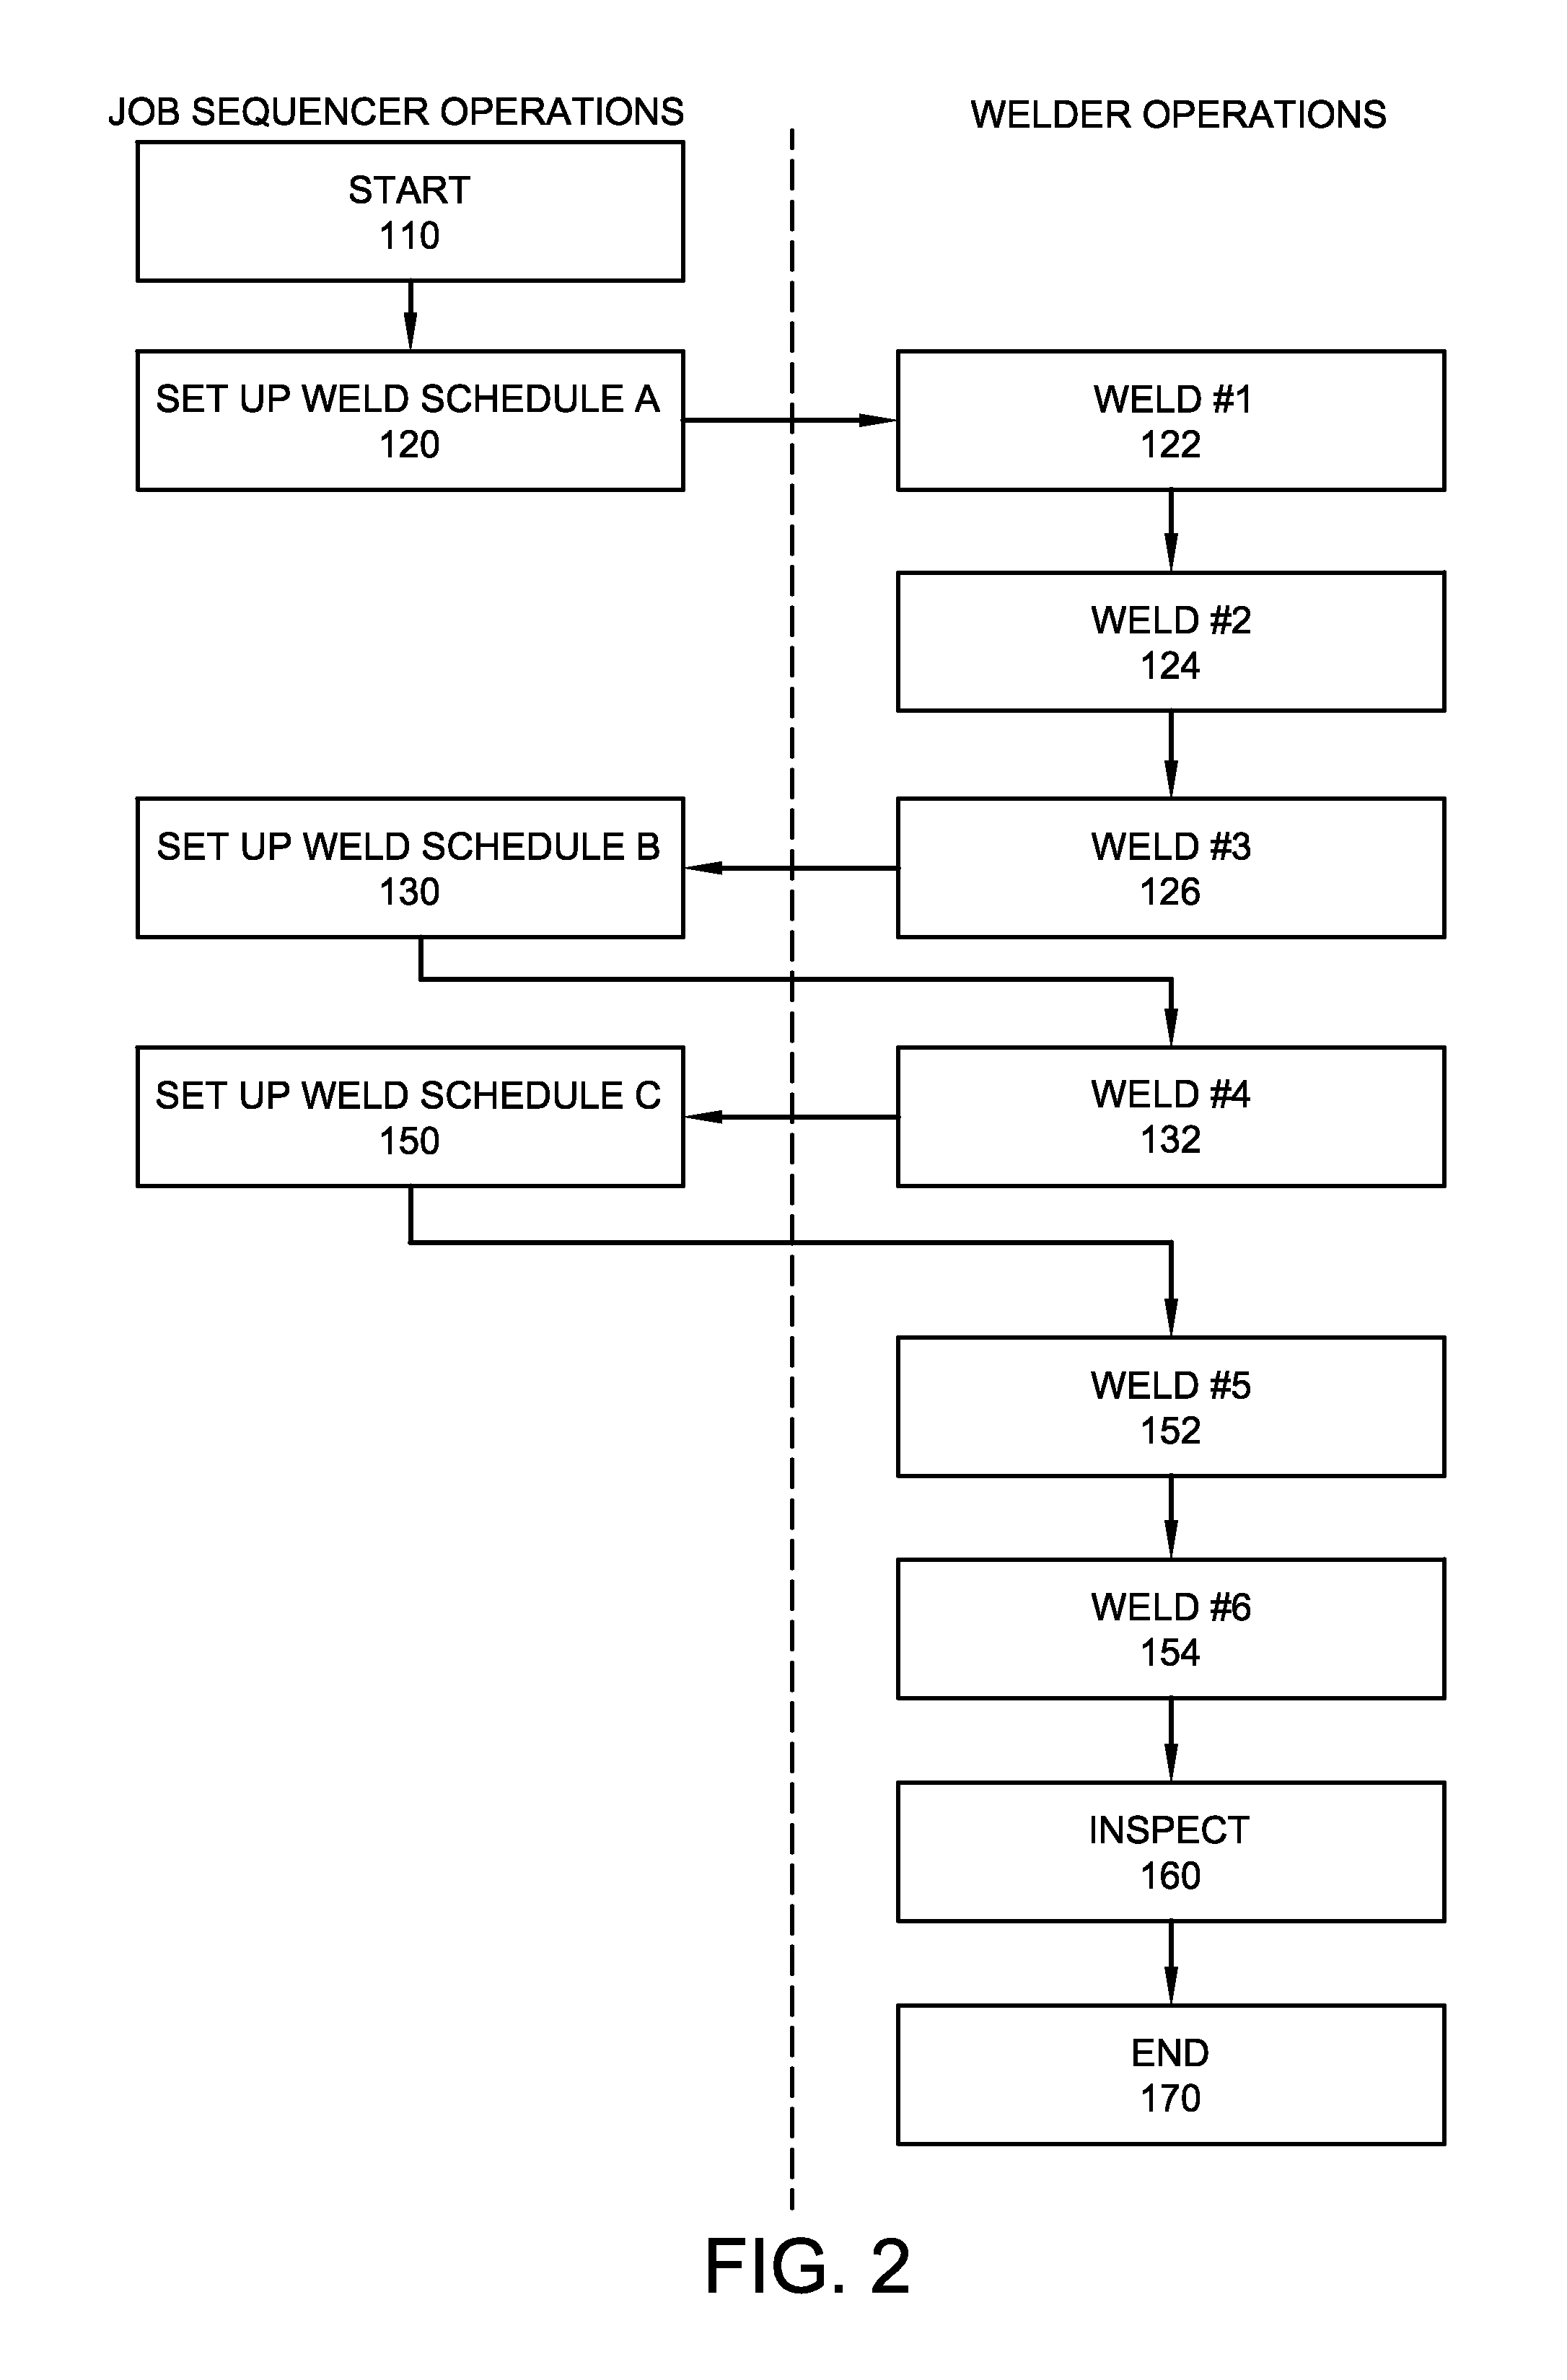 System and method of receiving or using data from external sources for a welding sequence